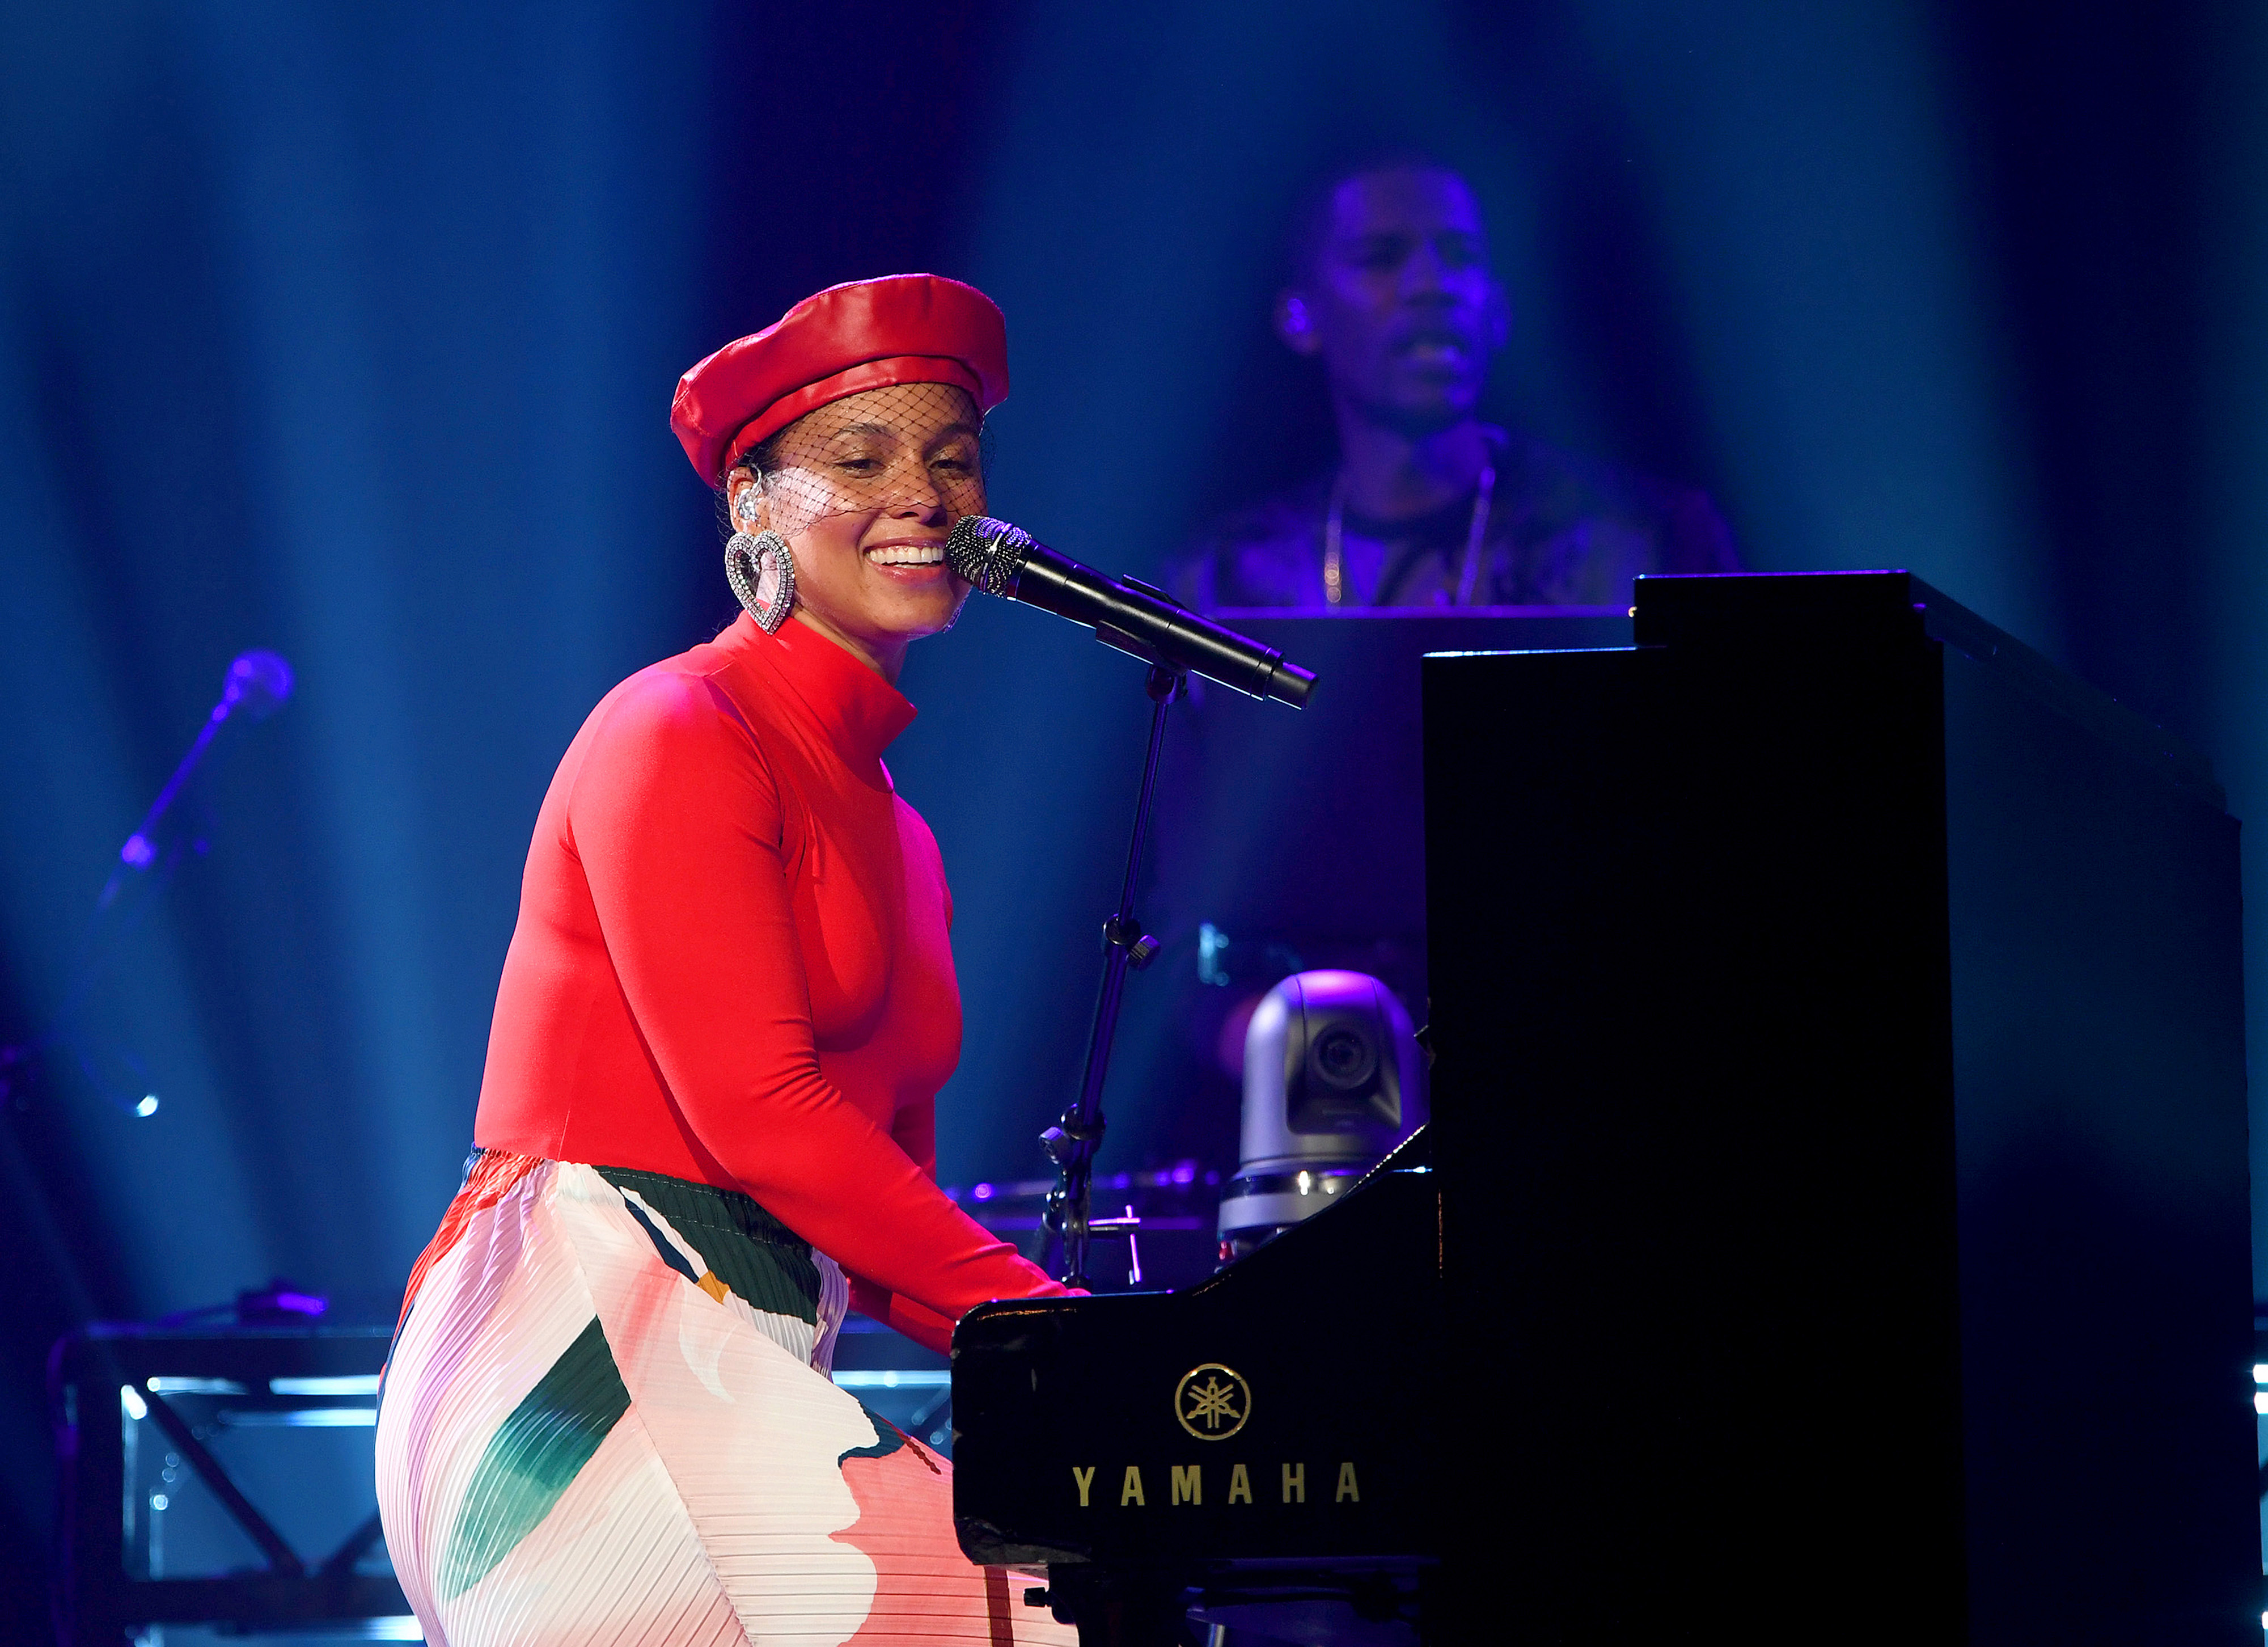  Alicia Keys At Pearl Concert Theater For Palms Casino Resort And KAOS' Grand Opening Weekend on April 05, 2019 in Las Vegas, Nevada. (Photo by Denise Truscello/Getty Images for Palms Casino Resort)